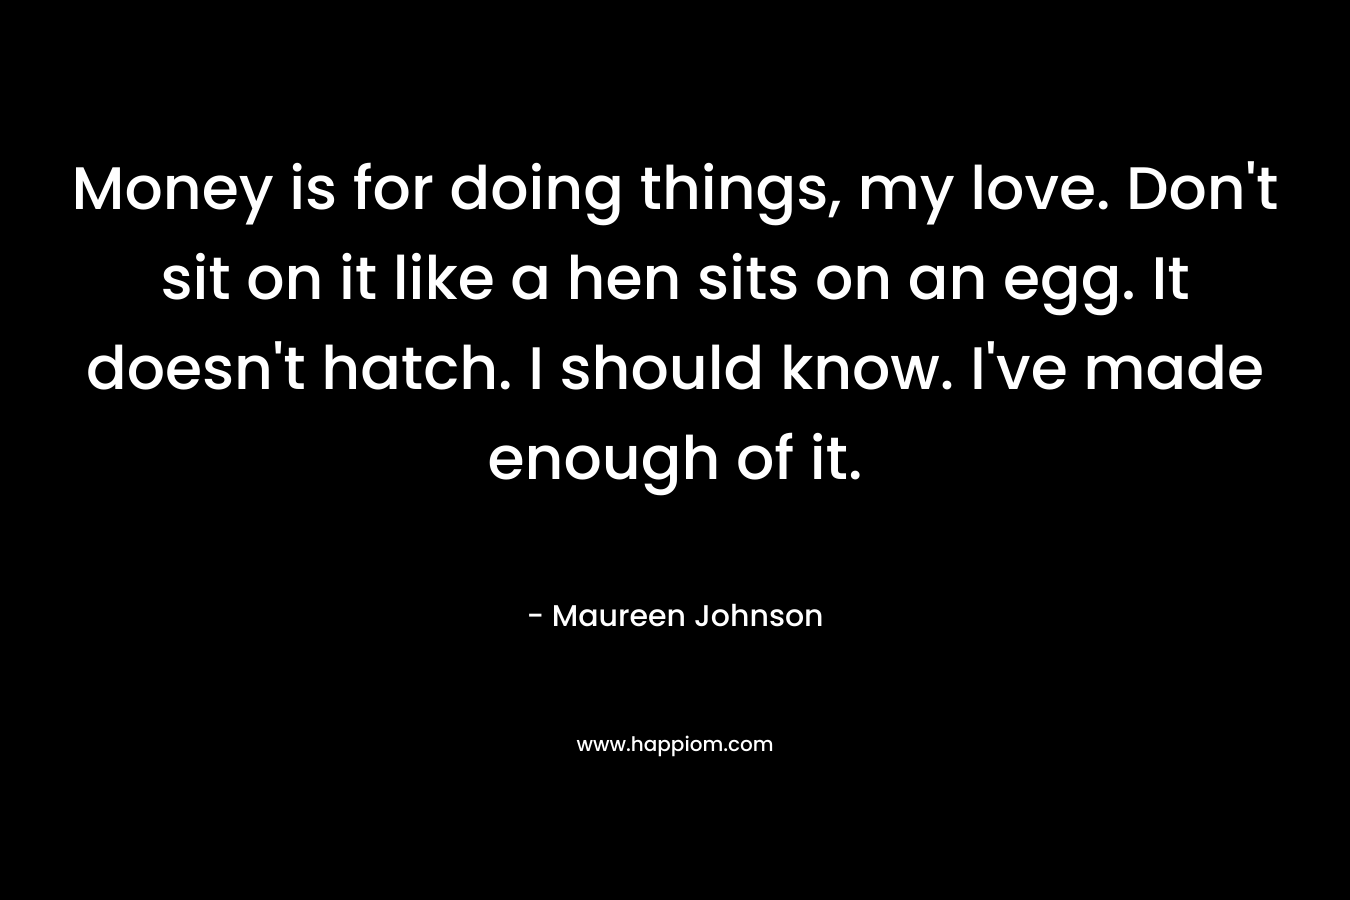 Money is for doing things, my love. Don’t sit on it like a hen sits on an egg. It doesn’t hatch. I should know. I’ve made enough of it. – Maureen Johnson